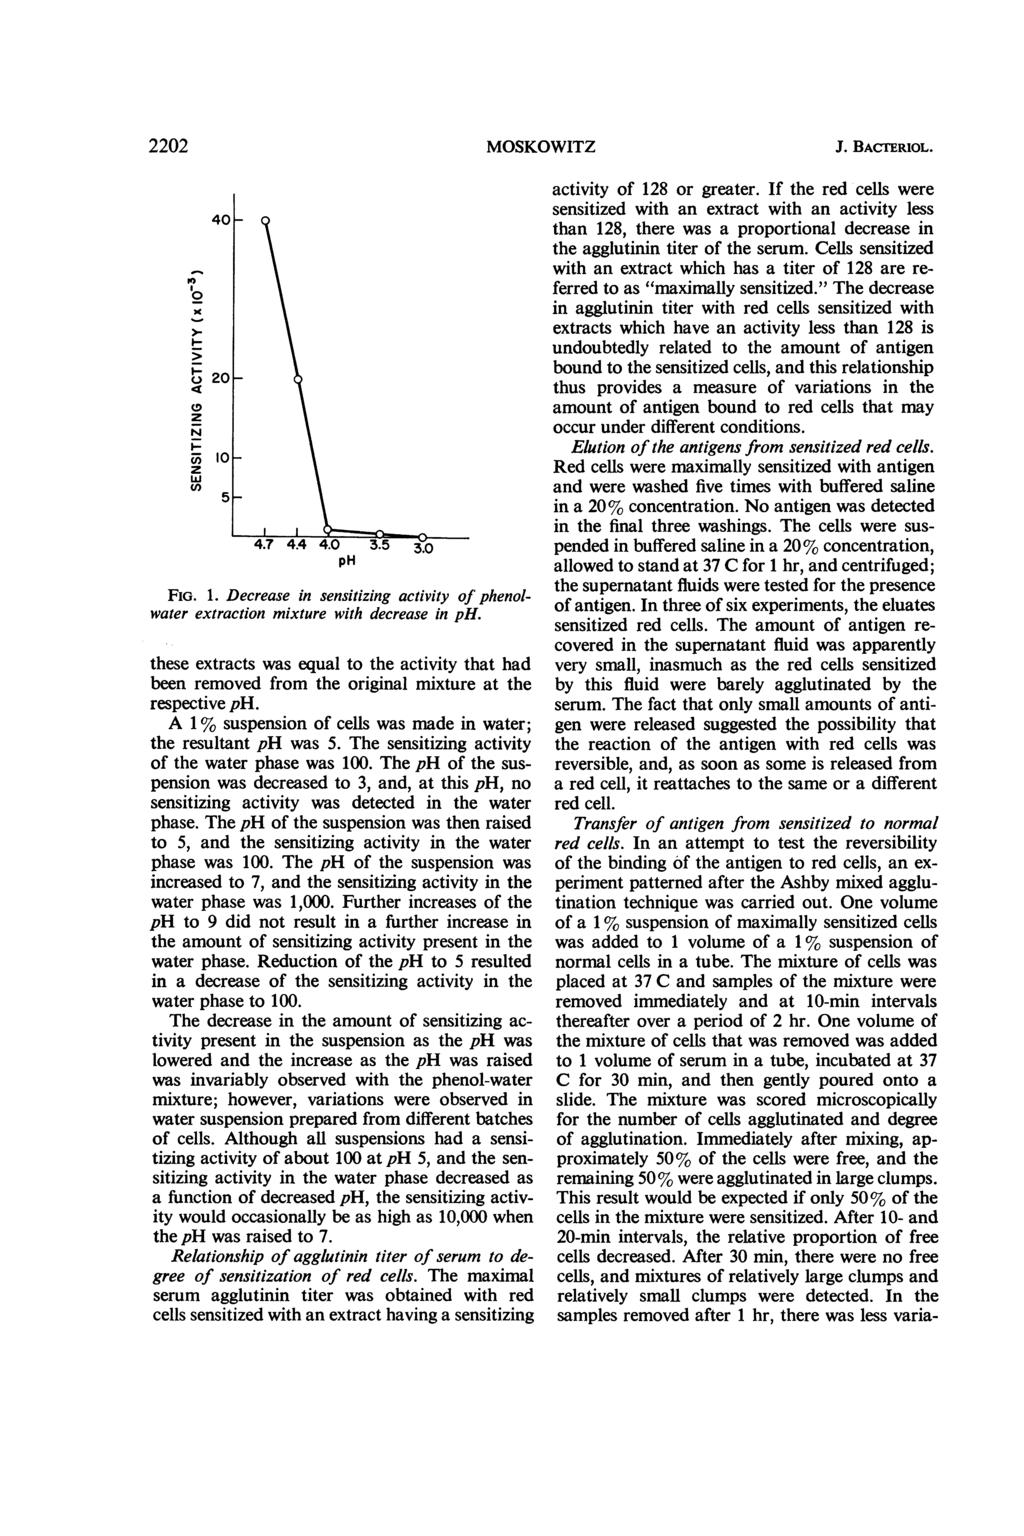 2202 MOSKOWITZ J. BAcTERioL. I0 0 I- - 4t z z w 40 20 10 5i 41 4 4 4.7 4 4.0 35 FIG. 1. Decrease in sensitizing activity of phenolwater extraction mixture with decrease in ph.